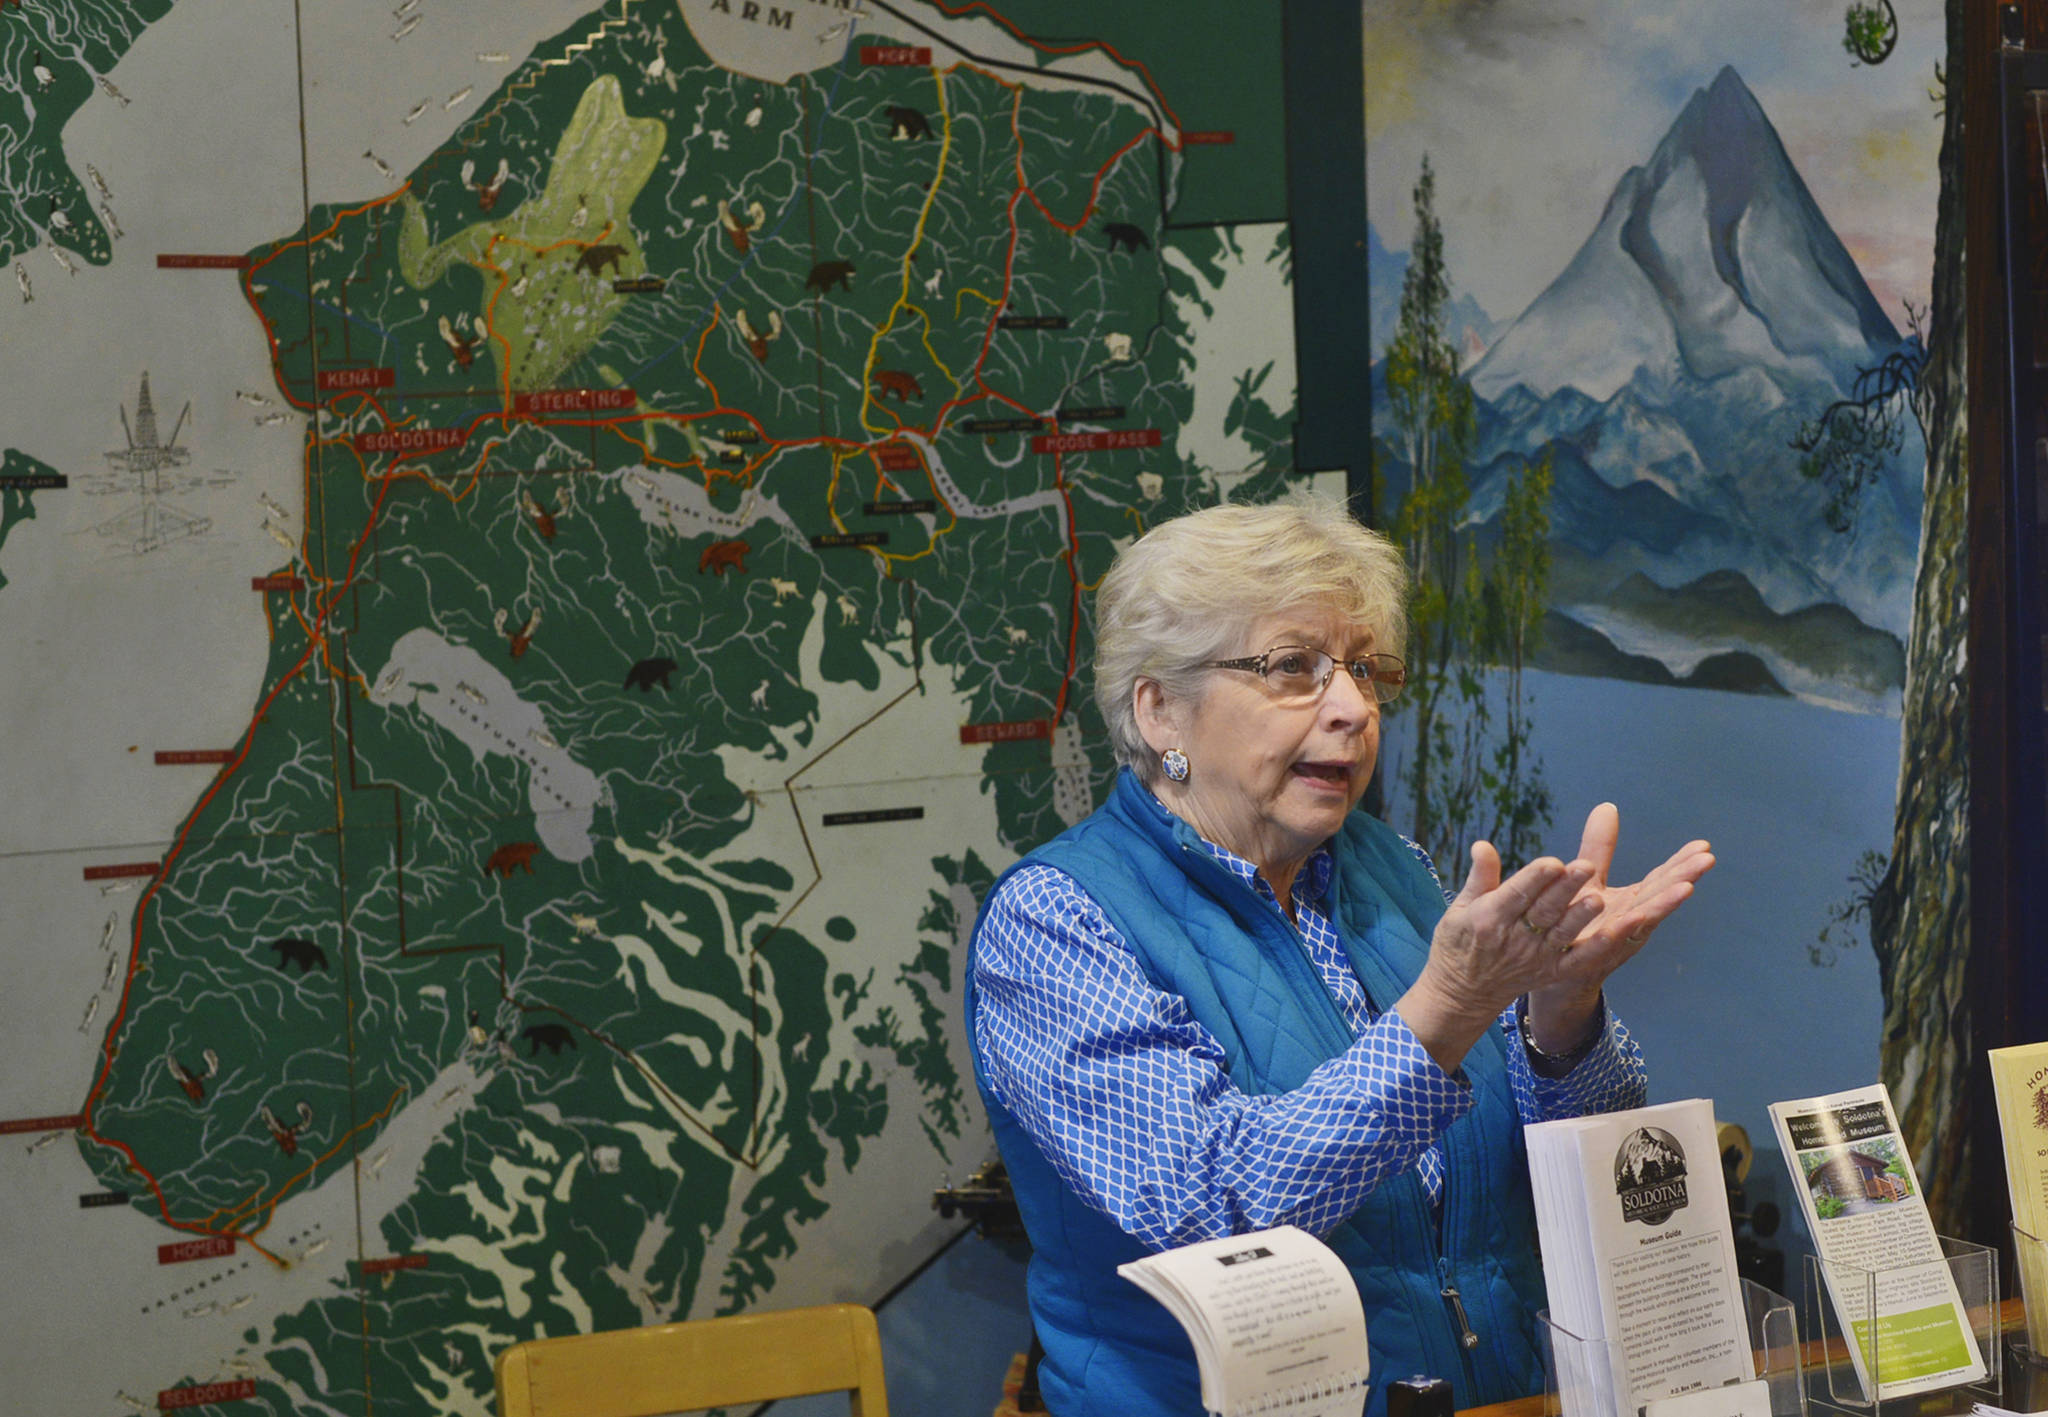 Docent Carroll Knutson describes Alaska’s 1964 earthquake to visitors of the Soldotna Historical Society Museum on Tuesday, July 17, 2018 in Soldotna. The Historical Society will be kicking off this year’s Soldotna Progress Days celebration on July 27 with a free community barbecue featuring several of Soldotna’s early settlers and their descendants. Knutson, whose family began homesteading about eight miles south of Soldotna in 1958, will be among those telling stories and leading tours through the museum’s collection of homesteader cabins and exhibits of artifacts. The event, from 4 p.m to 7 p.m, will also include music from Hobo Jim, a dutch oven demonstration, and children’s scavenger hunts. (Ben Boettger/Peninsula Clarion)